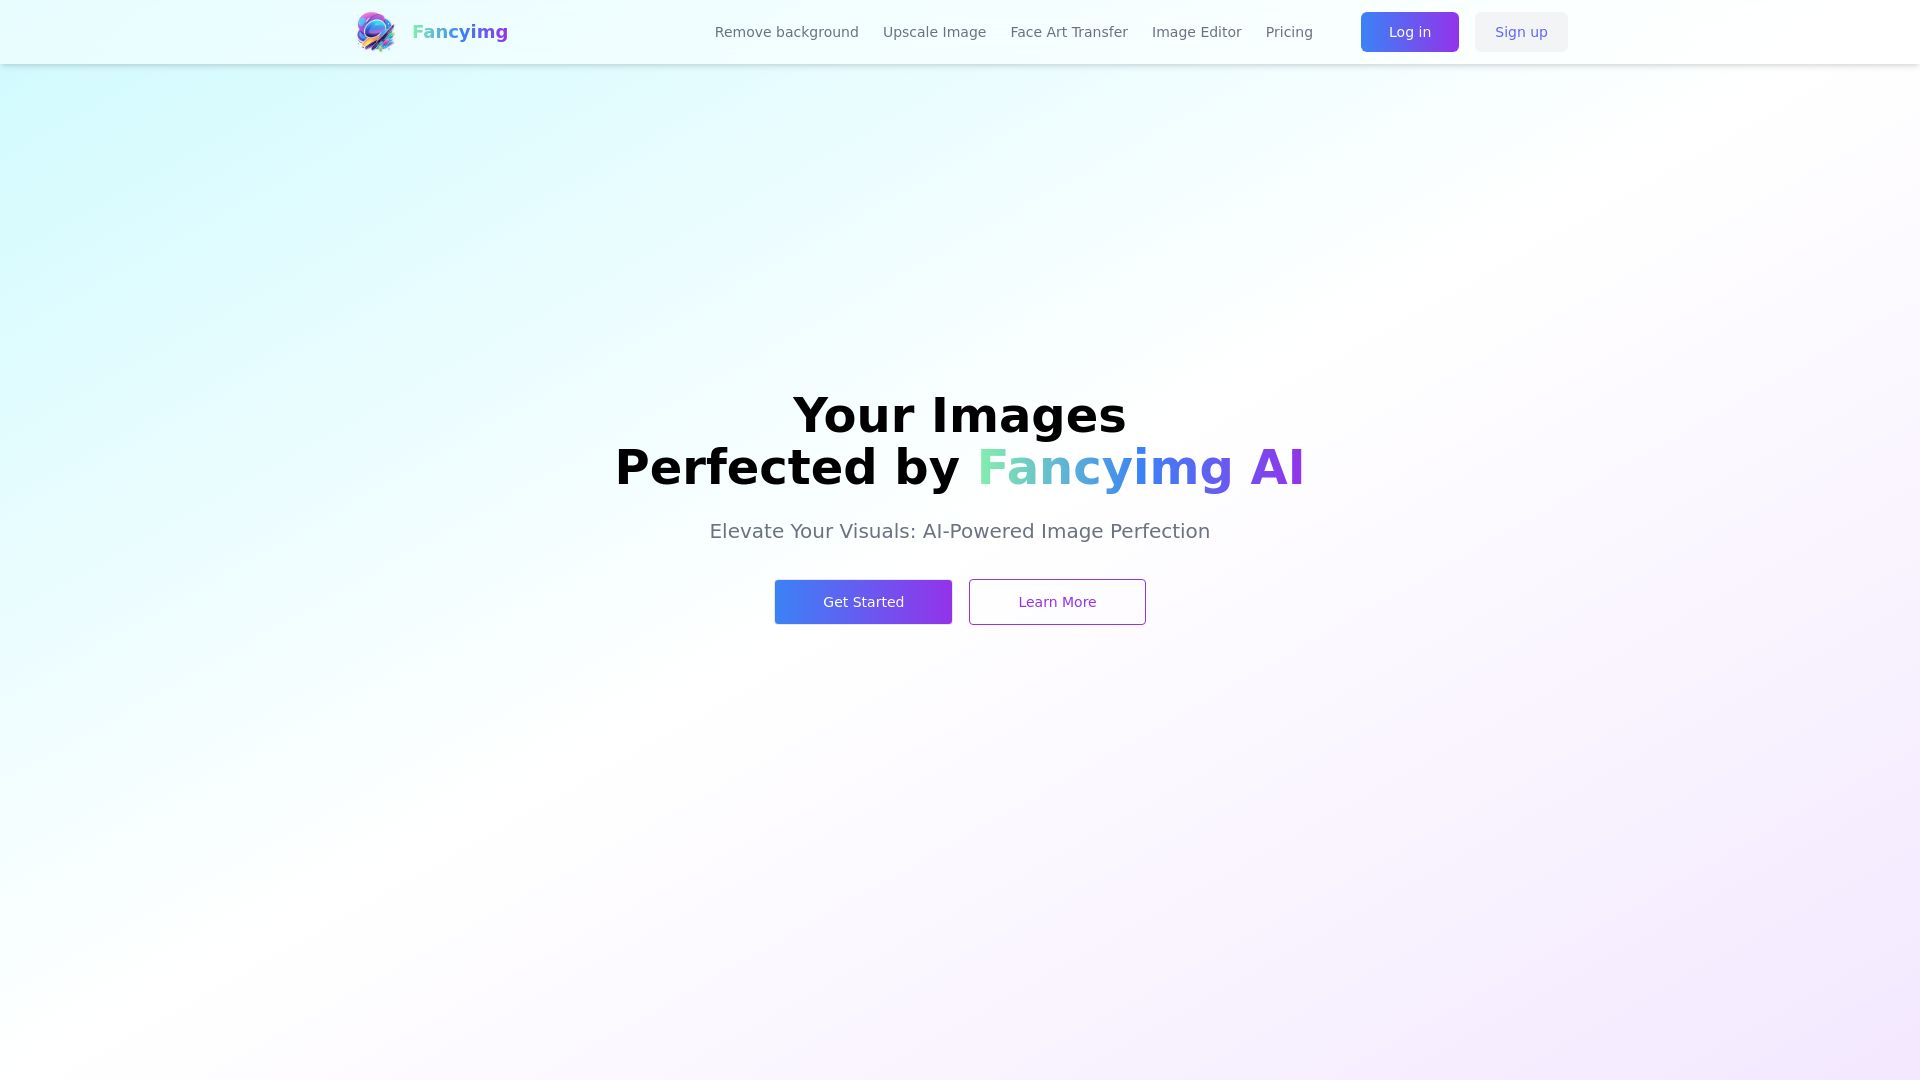 Fancyimg - Your Images, Perfected by Fancyimg AI